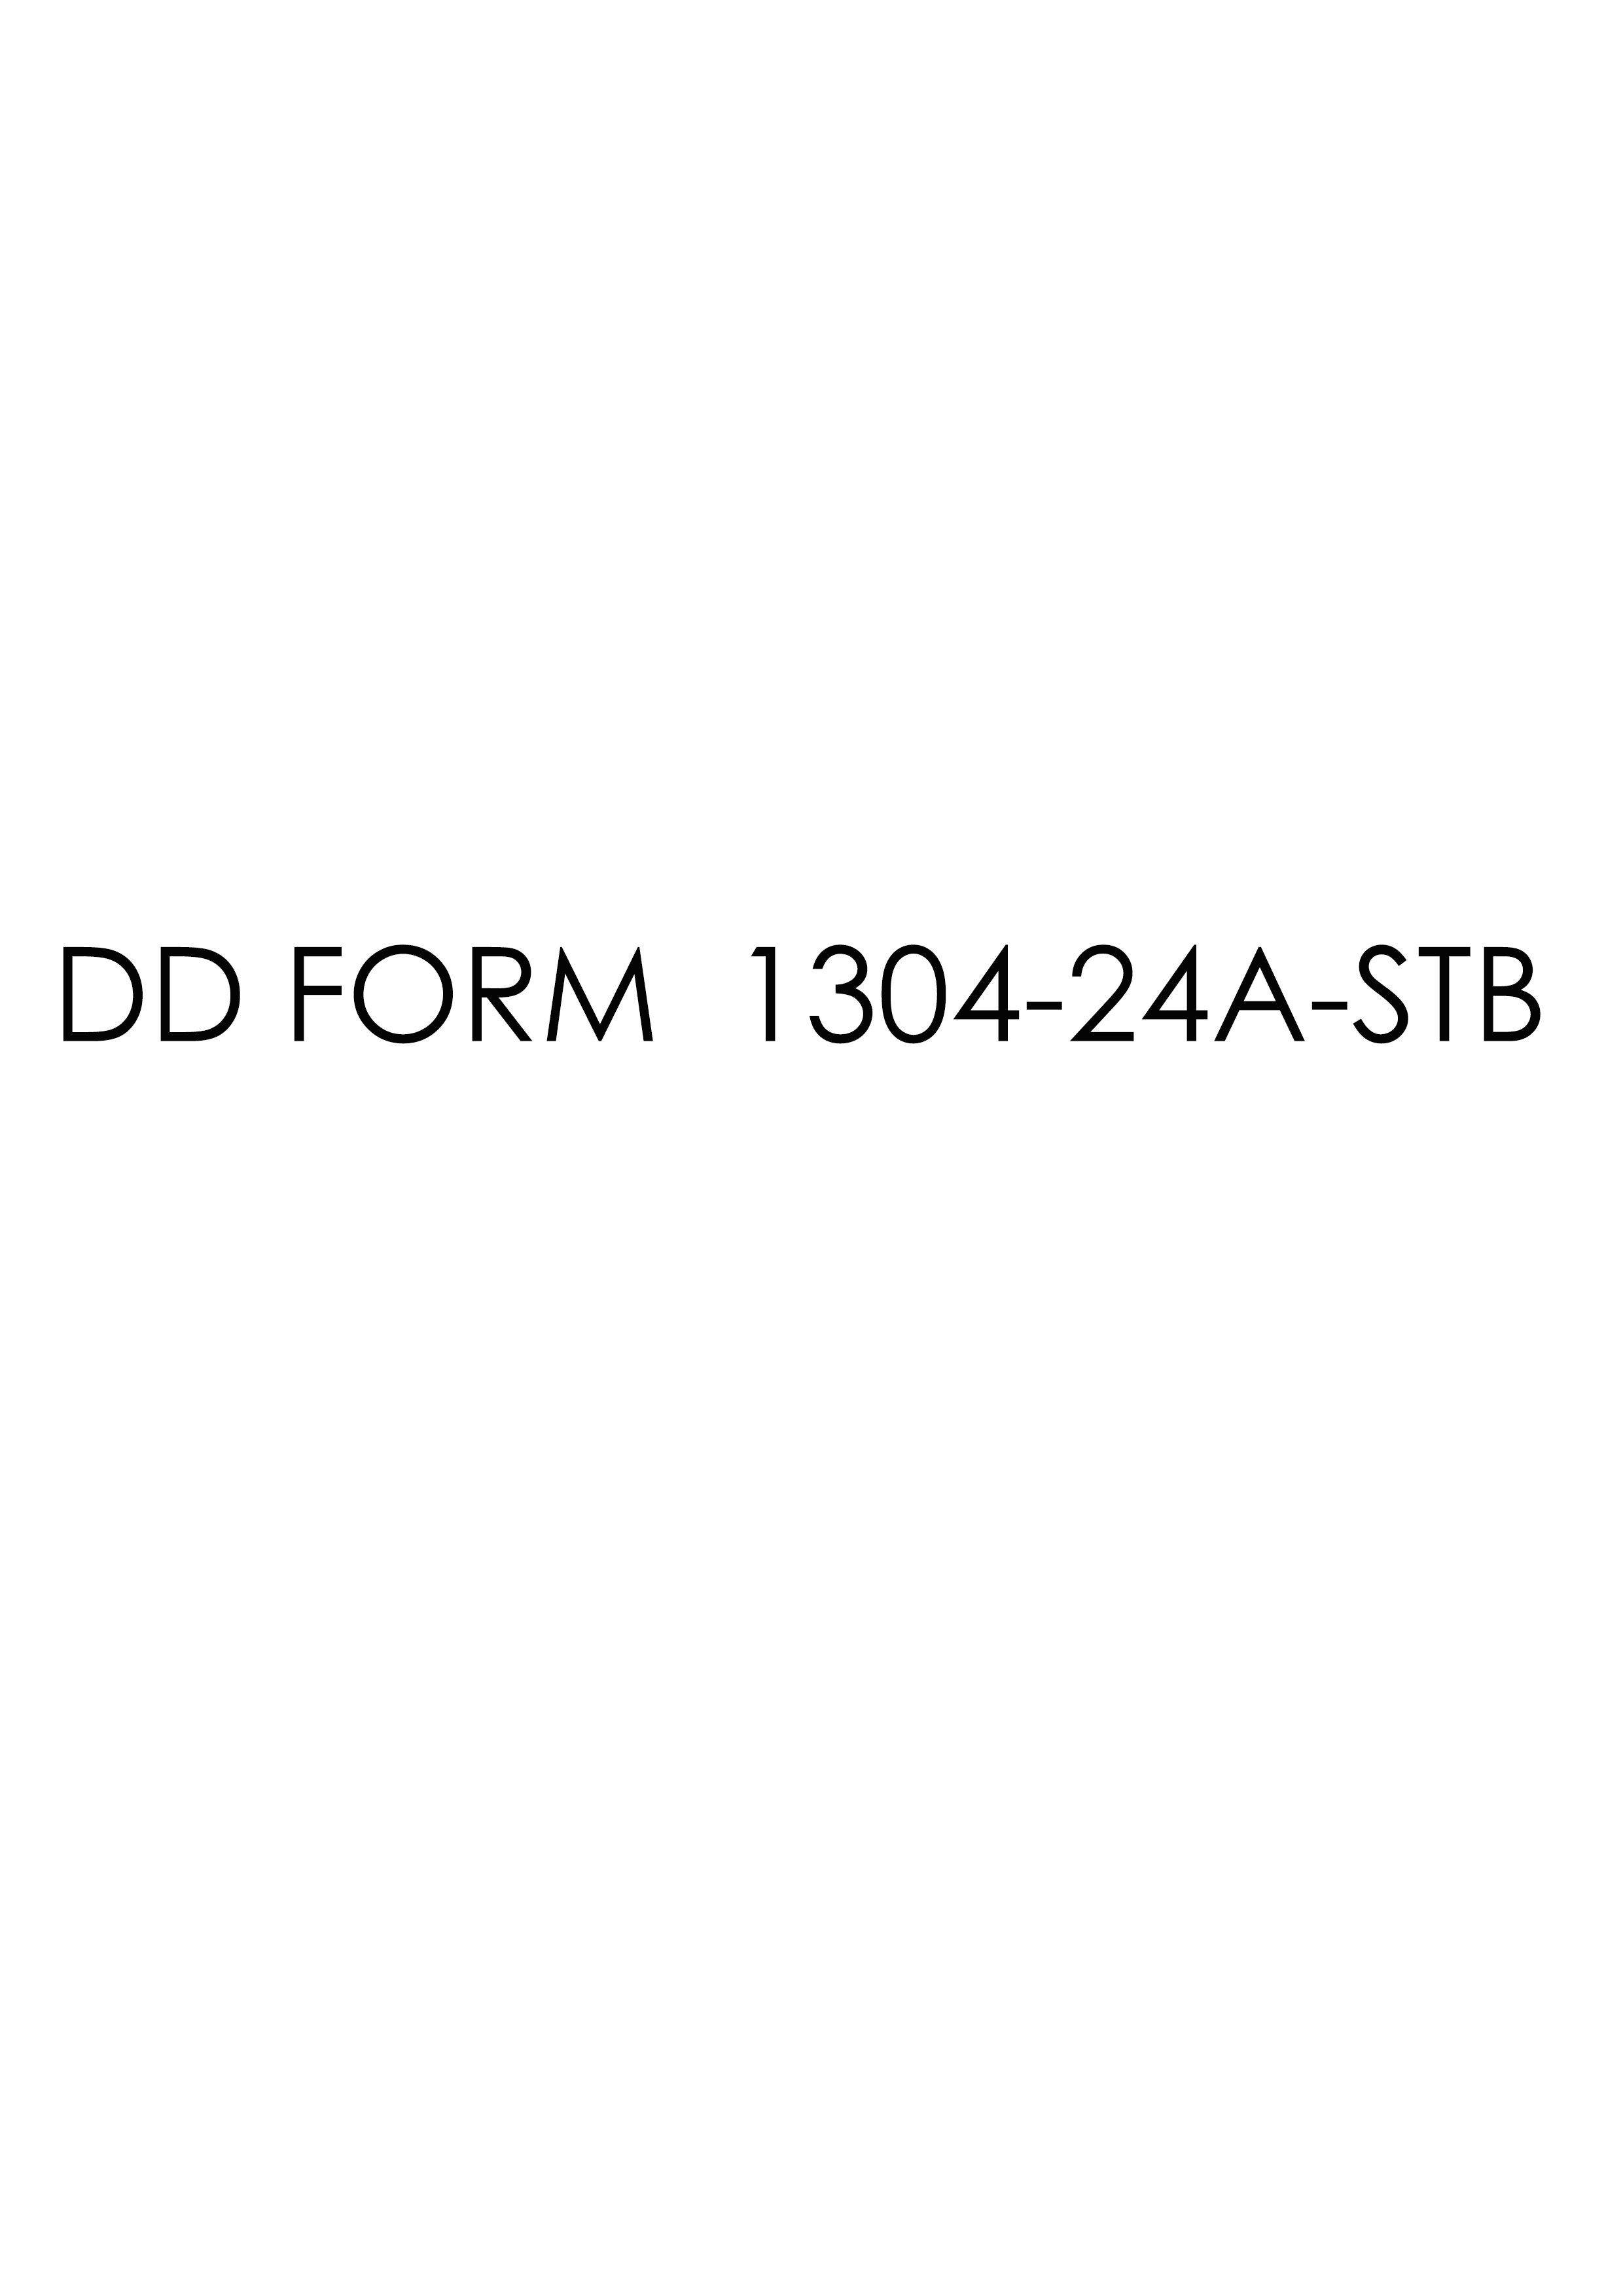 dd Form 1304-24A-STB fillable